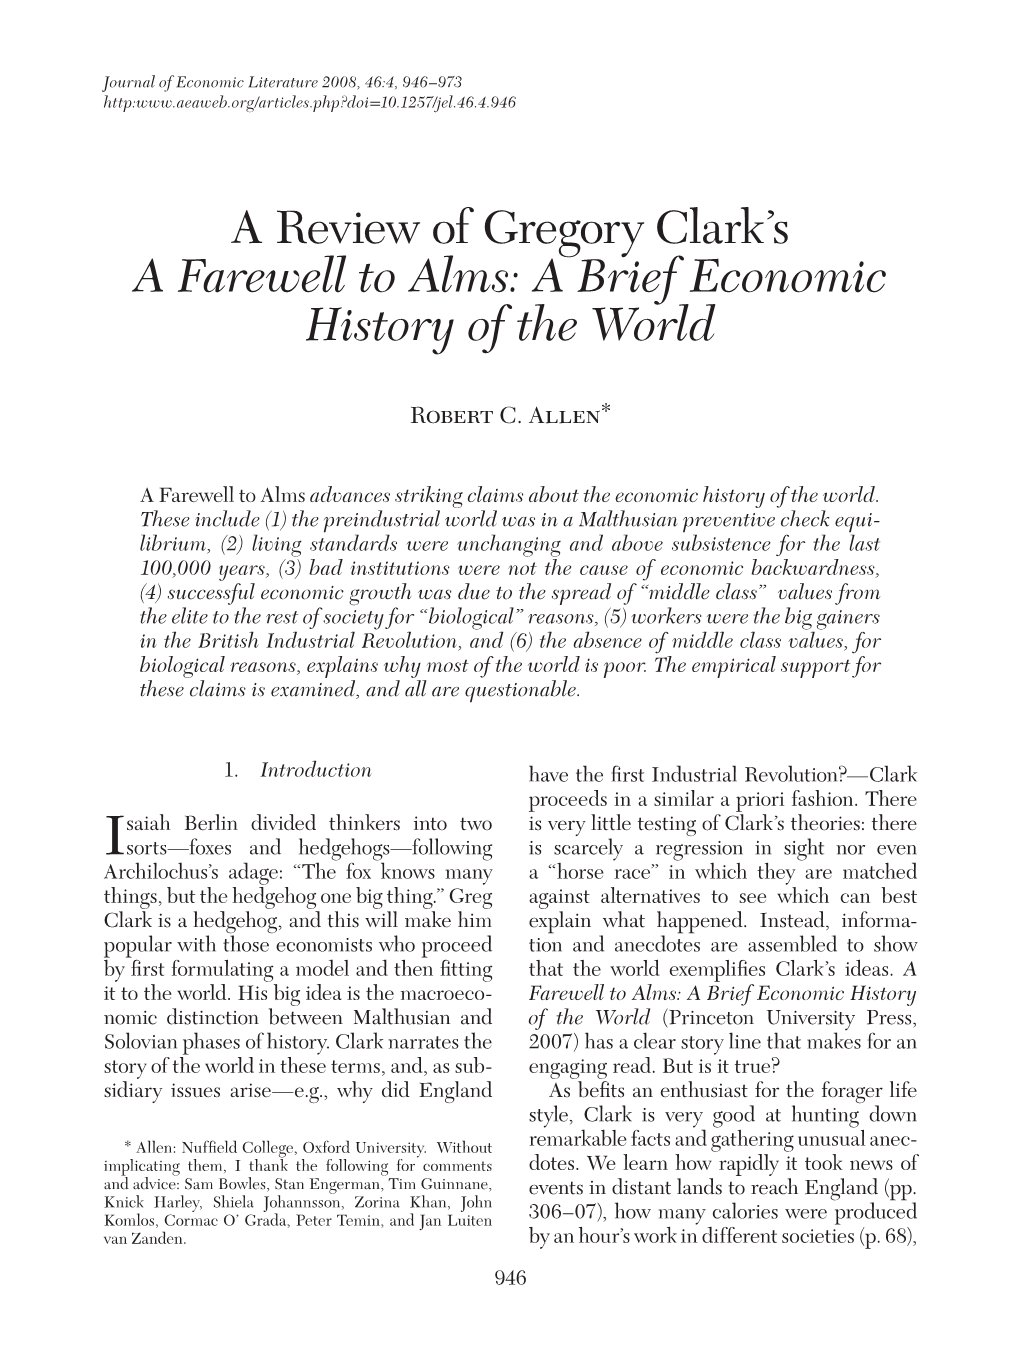 A Review of Gregory Clark's a Farewell to Alms